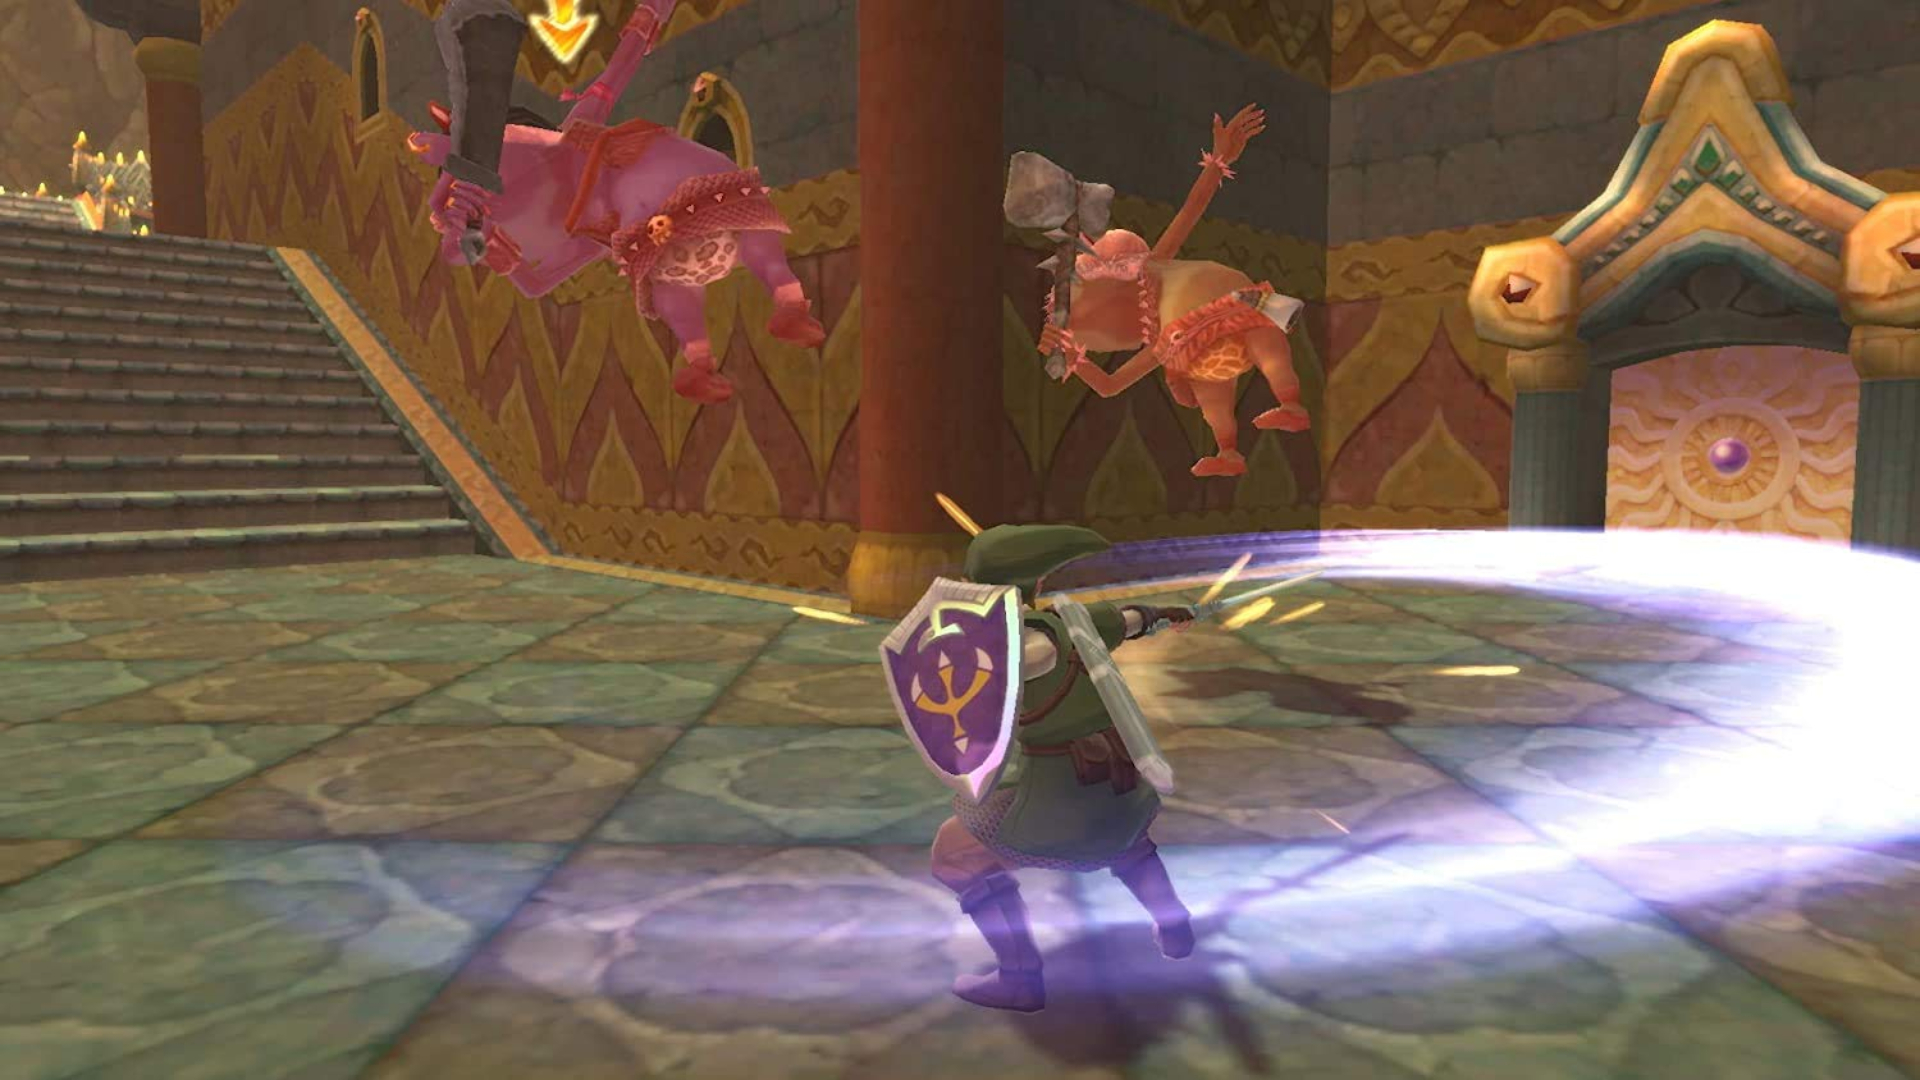 Link performing an attack with his sword